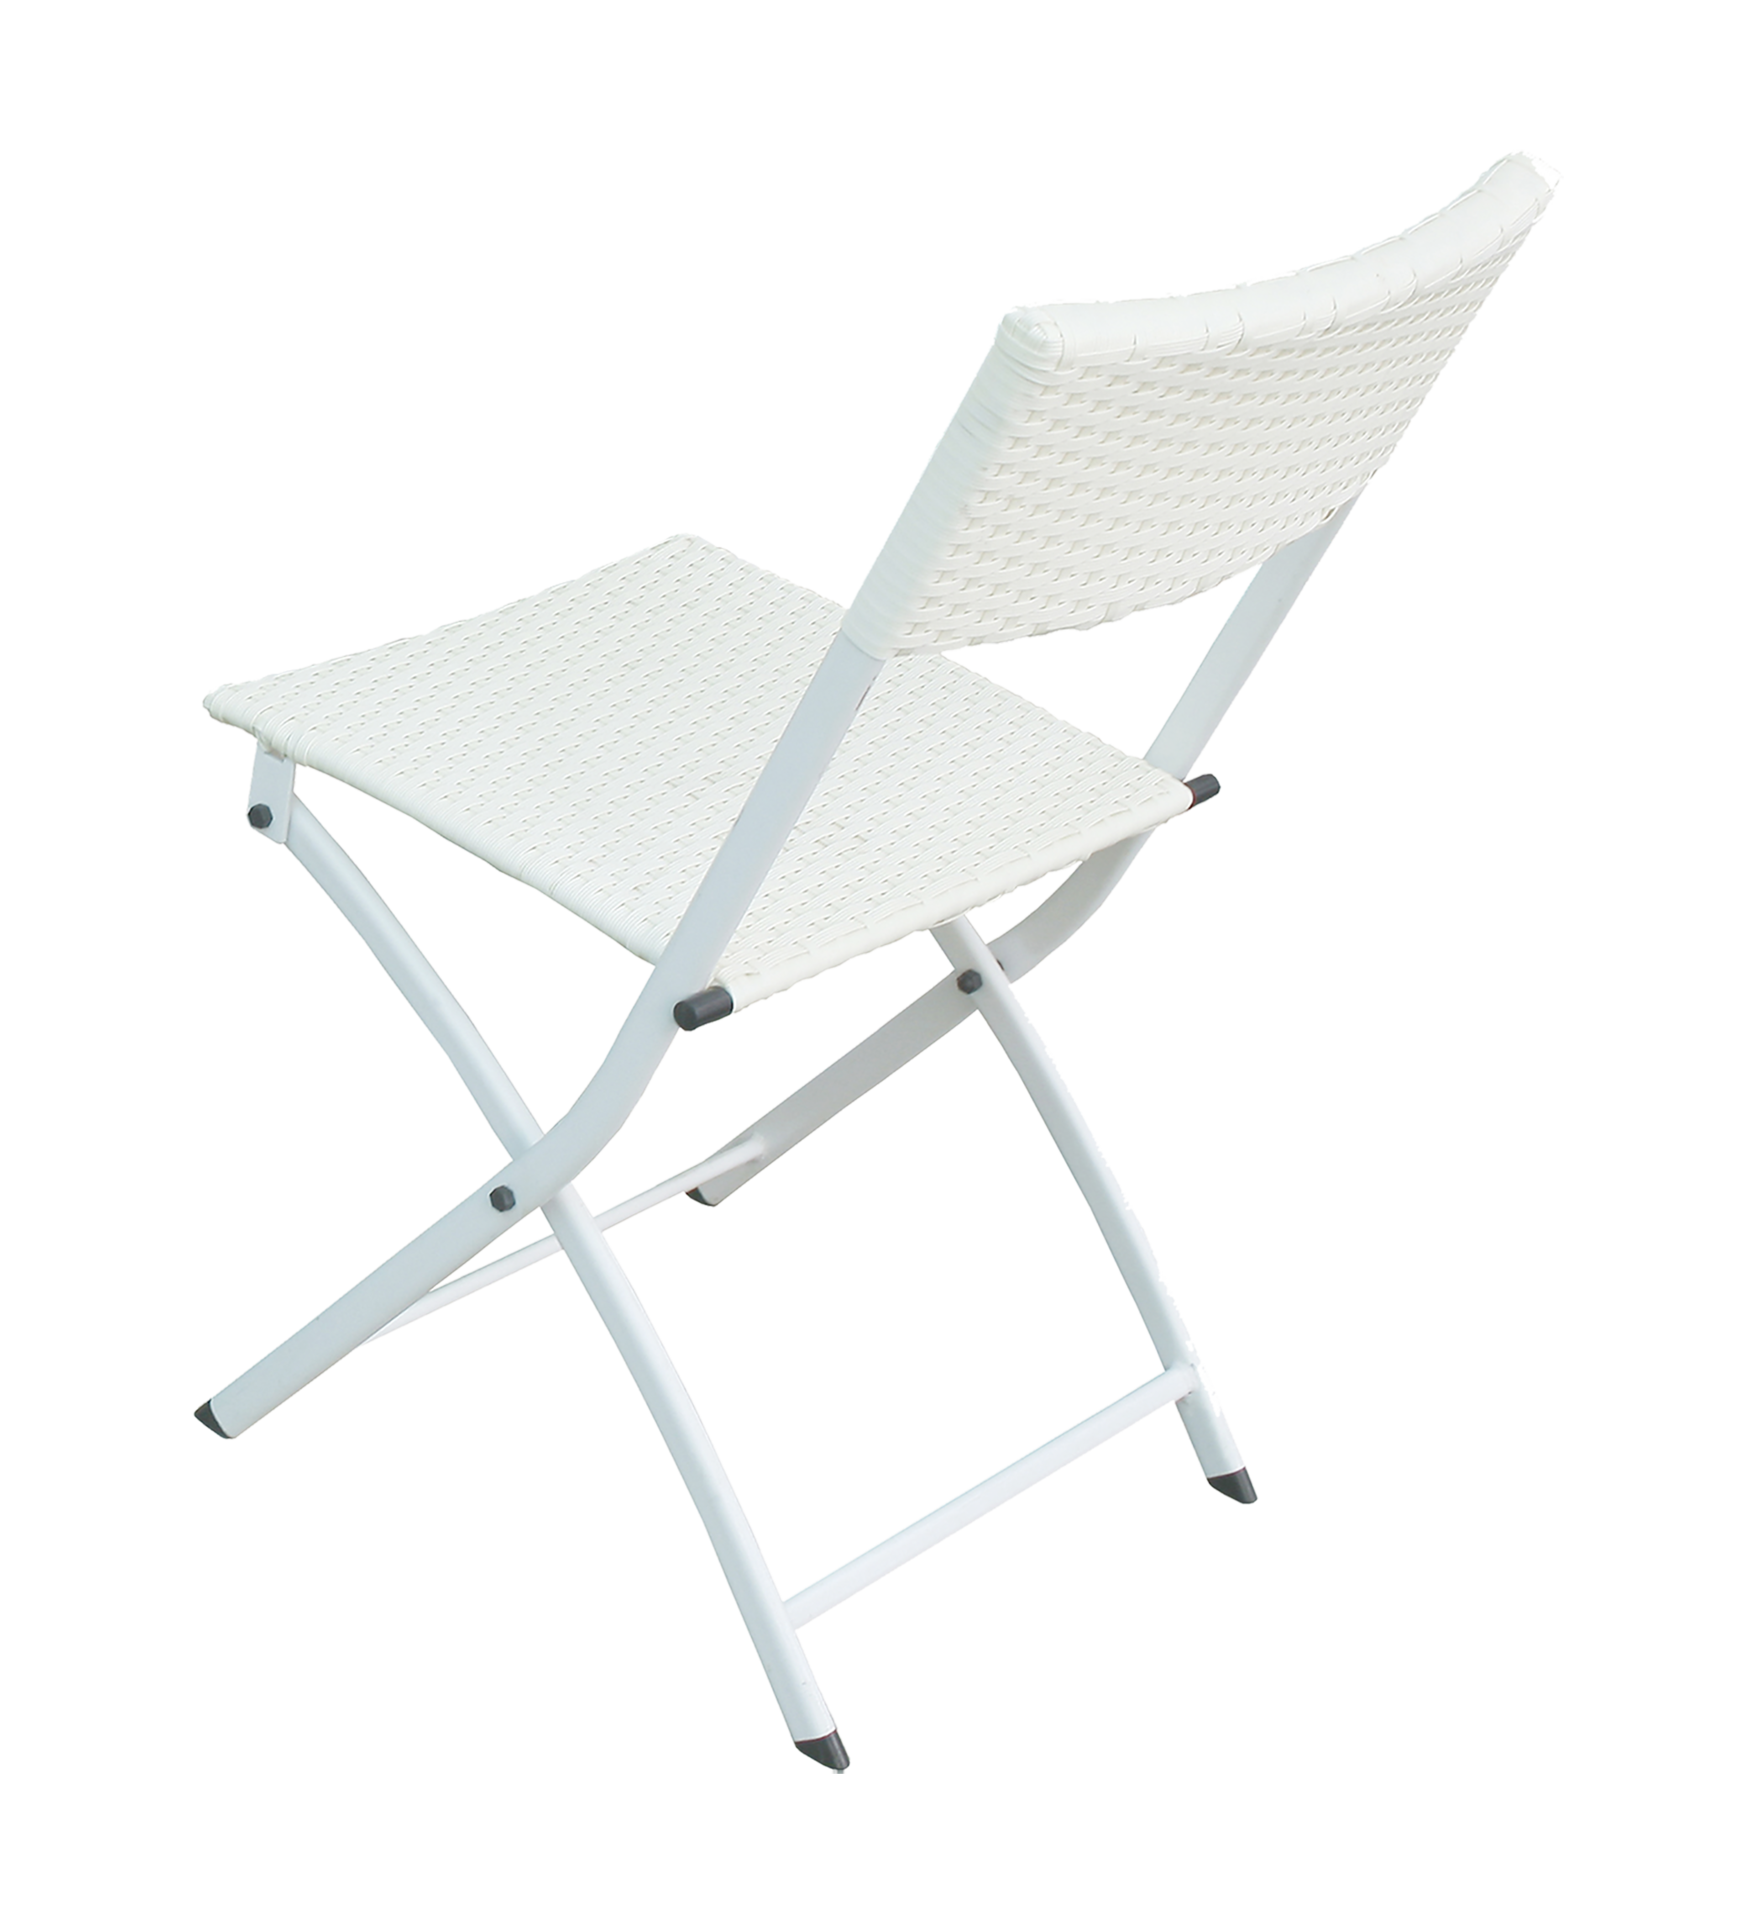 https://static.vecteezy.com/system/resources/previews/009/307/119/original/folding-chair-isolated-on-transparent-background-file-png.png